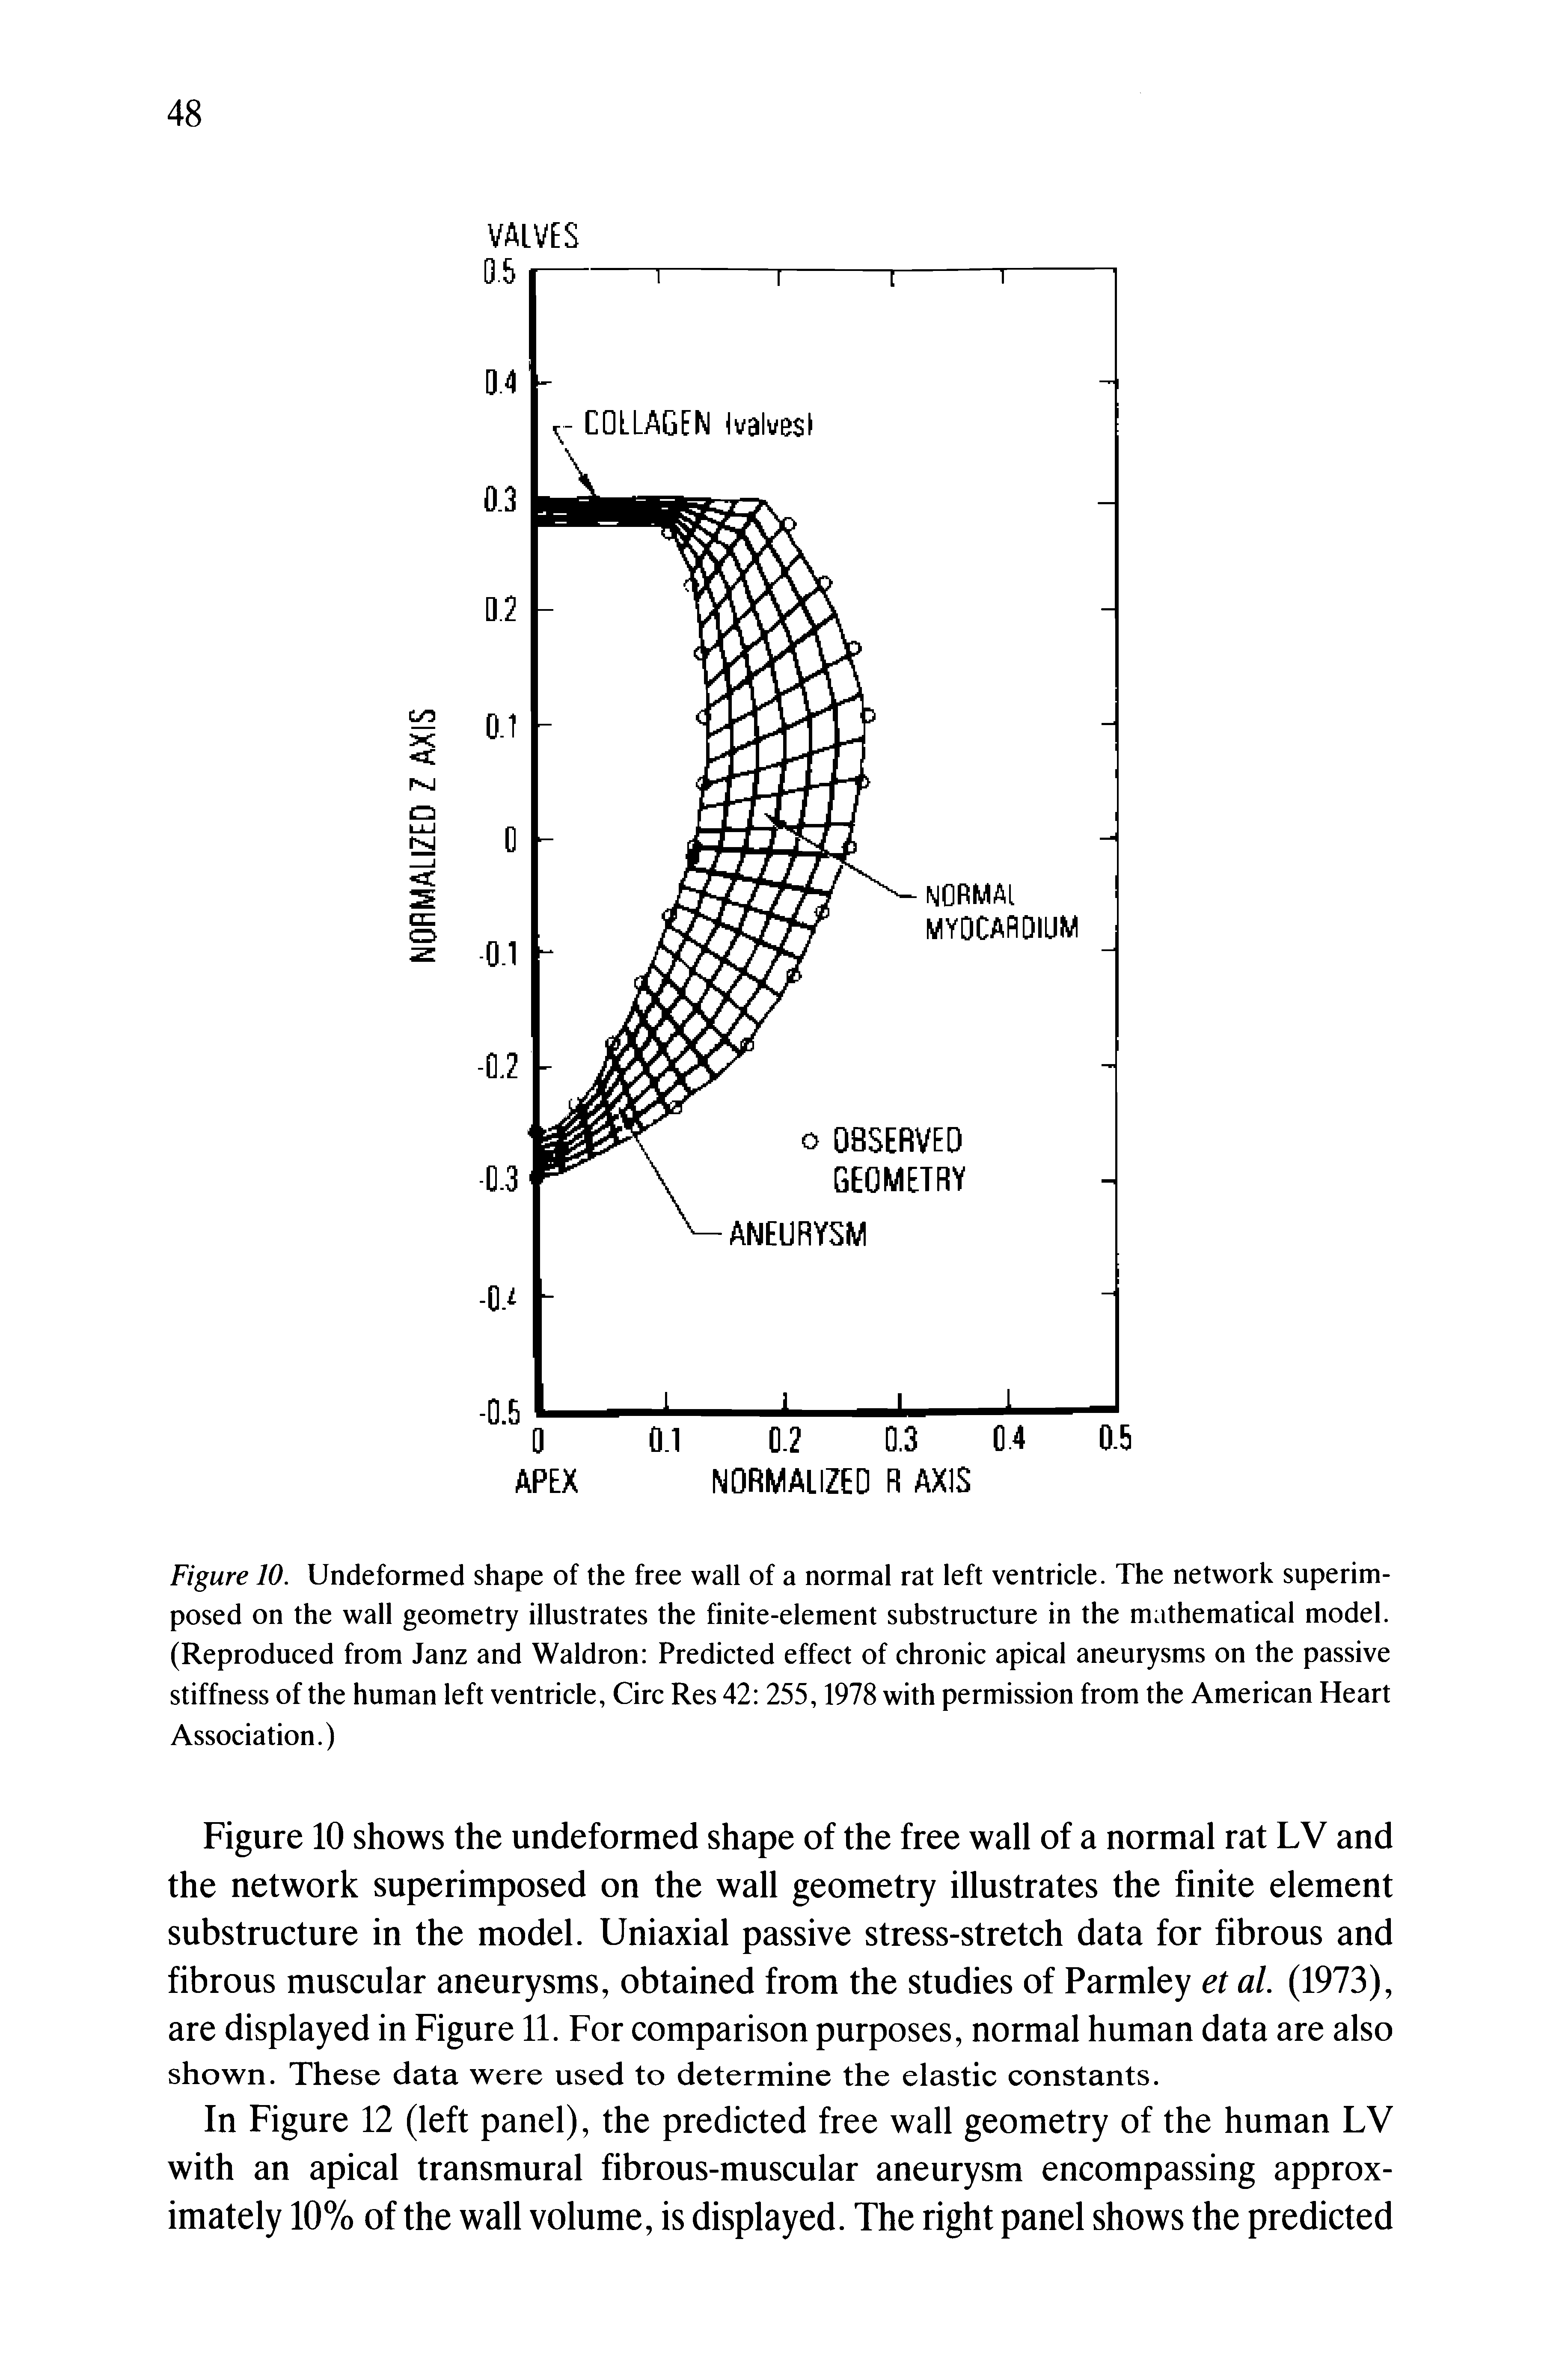 Figure 10 shows the undeformed shape of the free wall of a normal rat LV and the network superimposed on the wall geometry illustrates the finite element substructure in the model. Uniaxial passive stress-stretch data for fibrous and fibrous muscular aneurysms, obtained from the studies of Parmley et al. (1973), are displayed in Figure 11. For comparison purposes, normal human data are also shown. These data were used to determine the elastic constants.